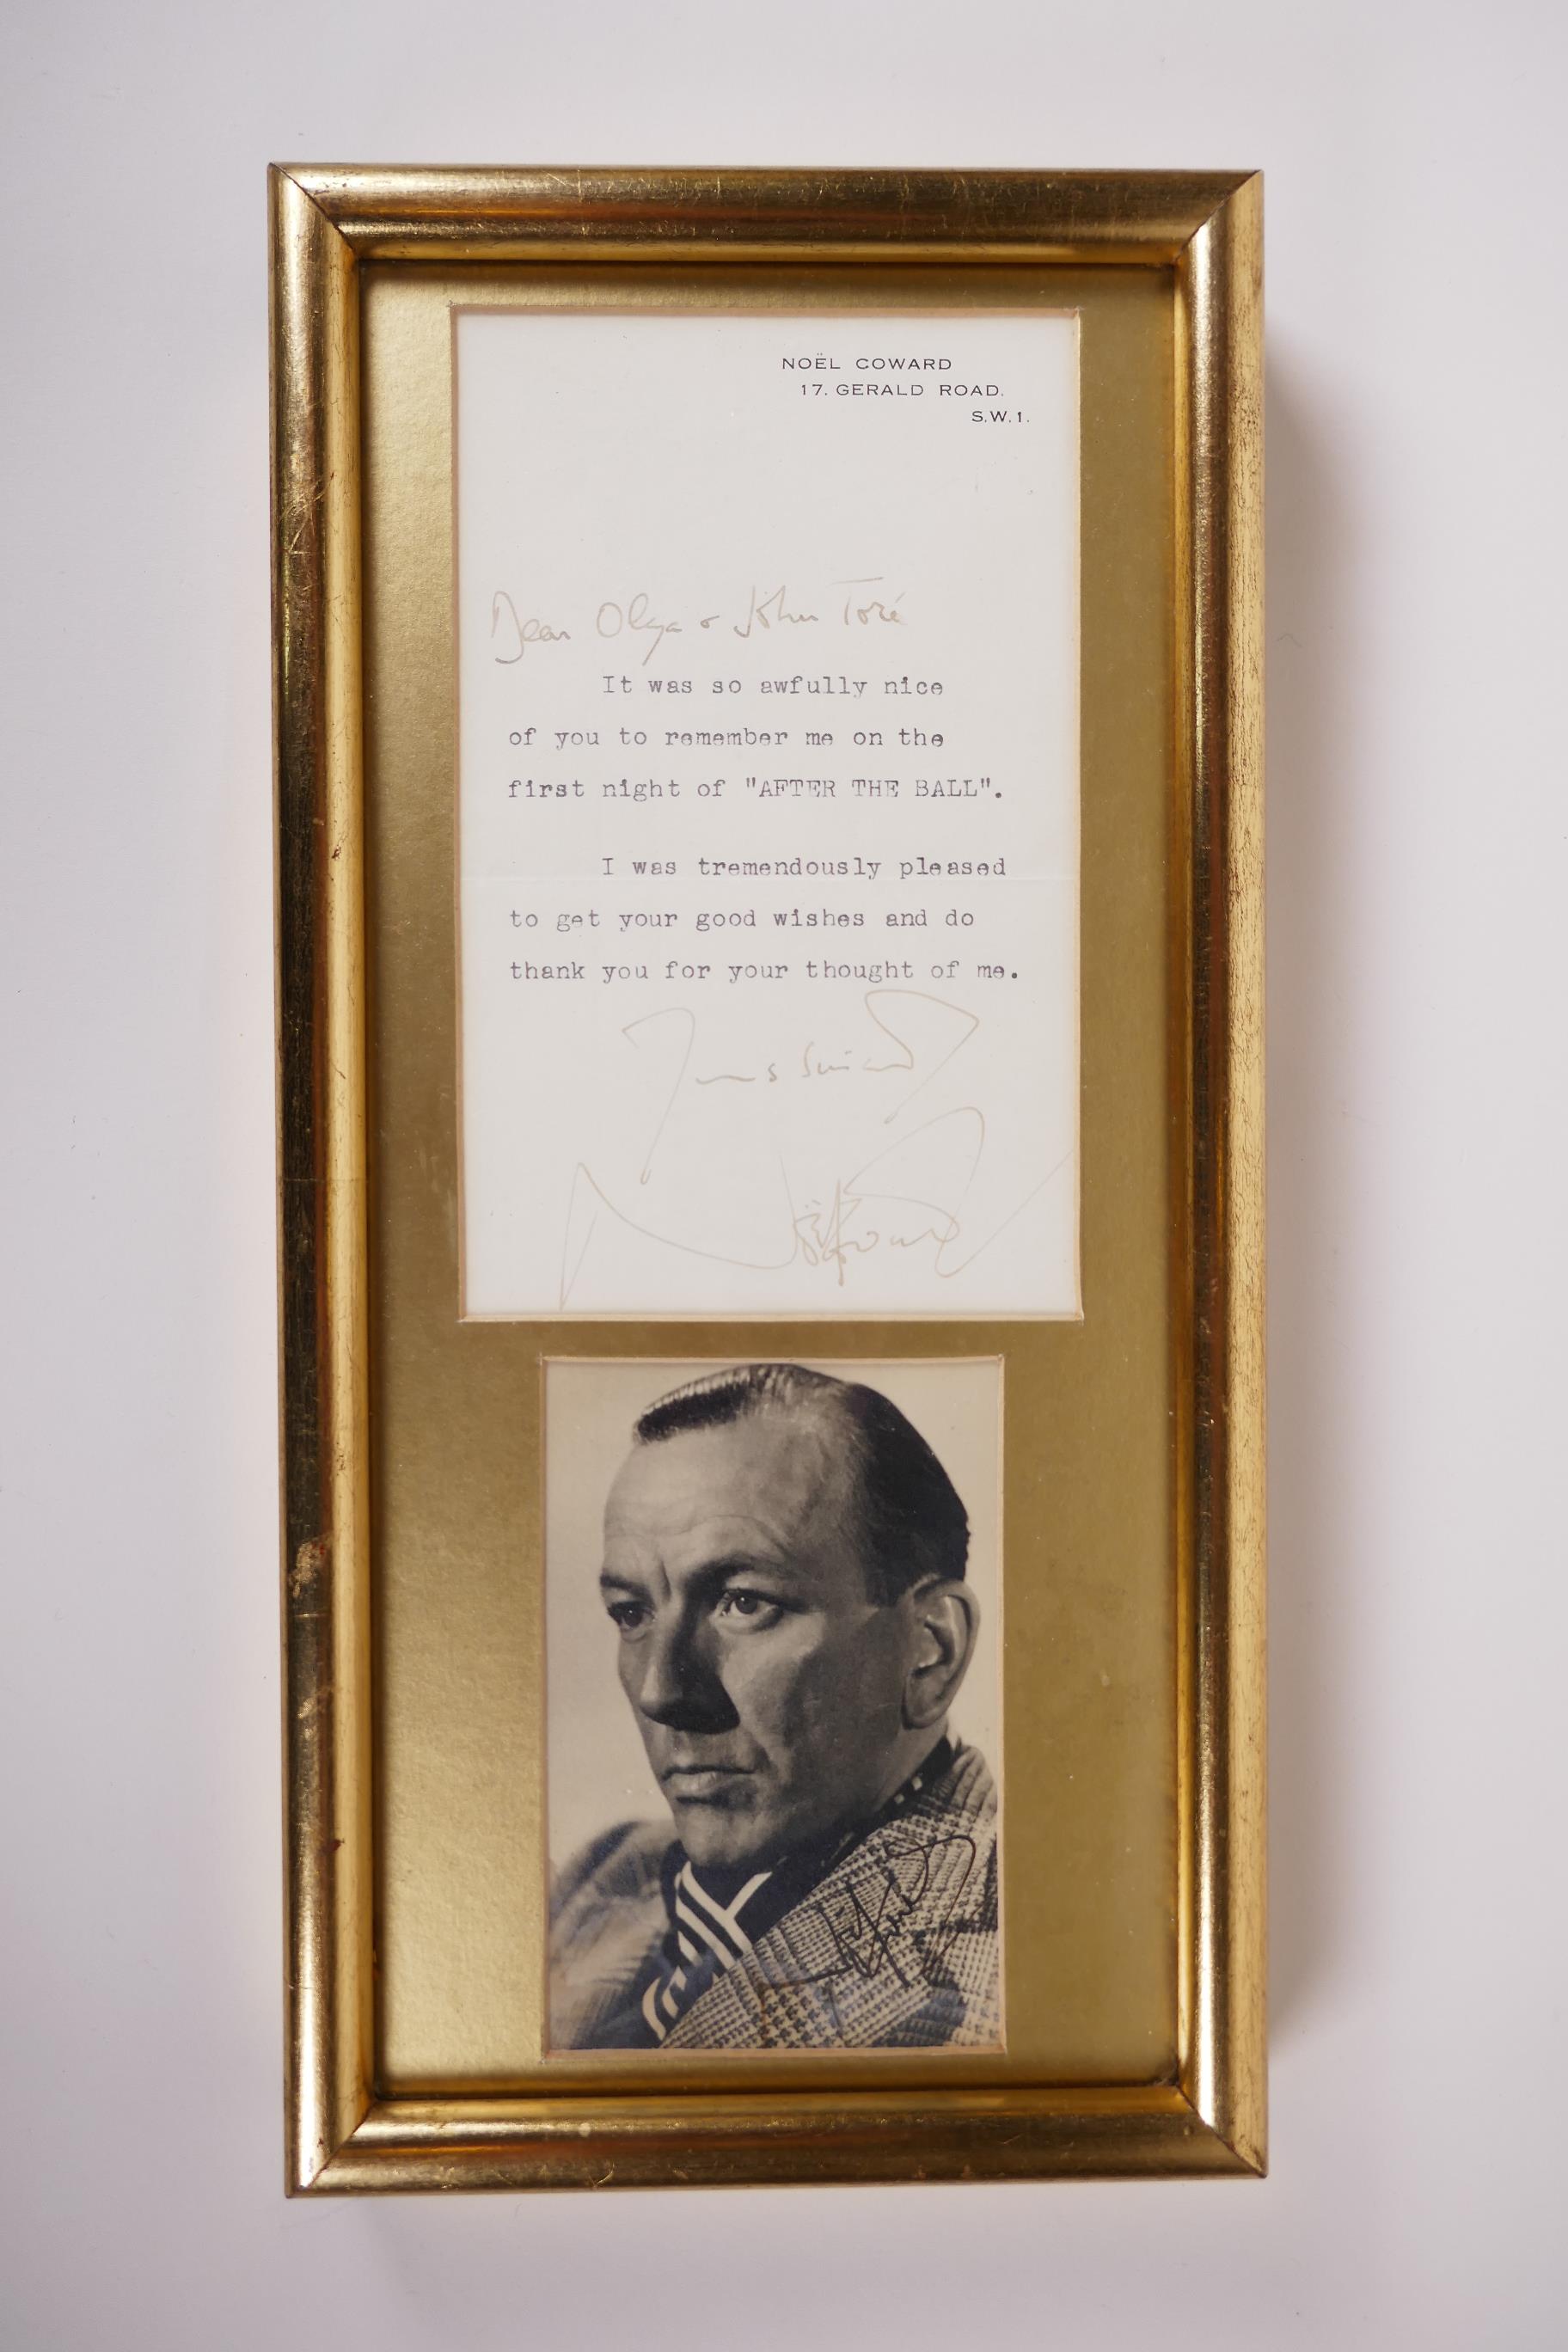 Noel Coward (British, 1899-1973) – British playwright, actor, composer, director and singer, - Image 2 of 9